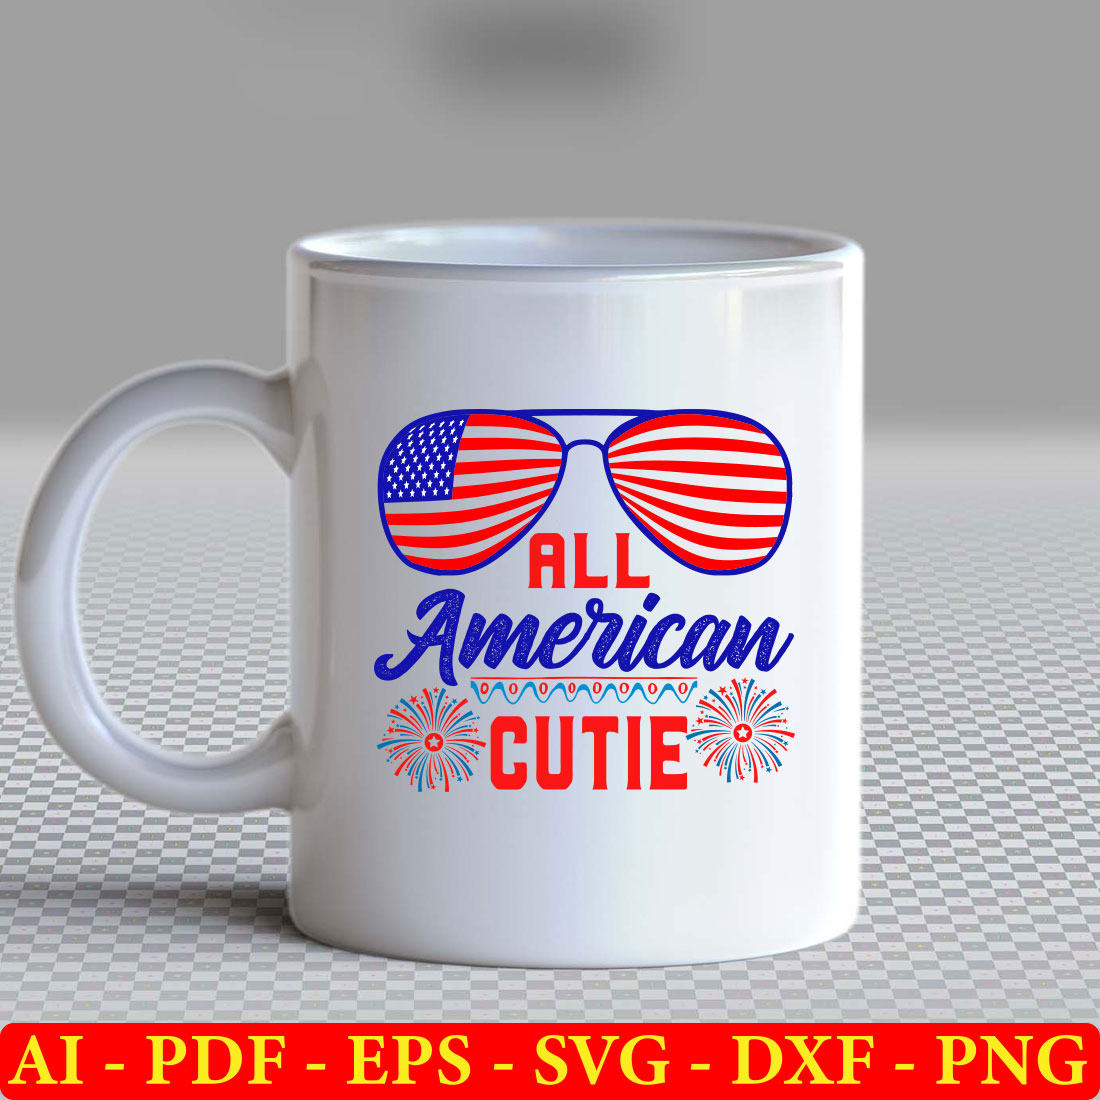 White coffee mug with the words all american cutie on it.